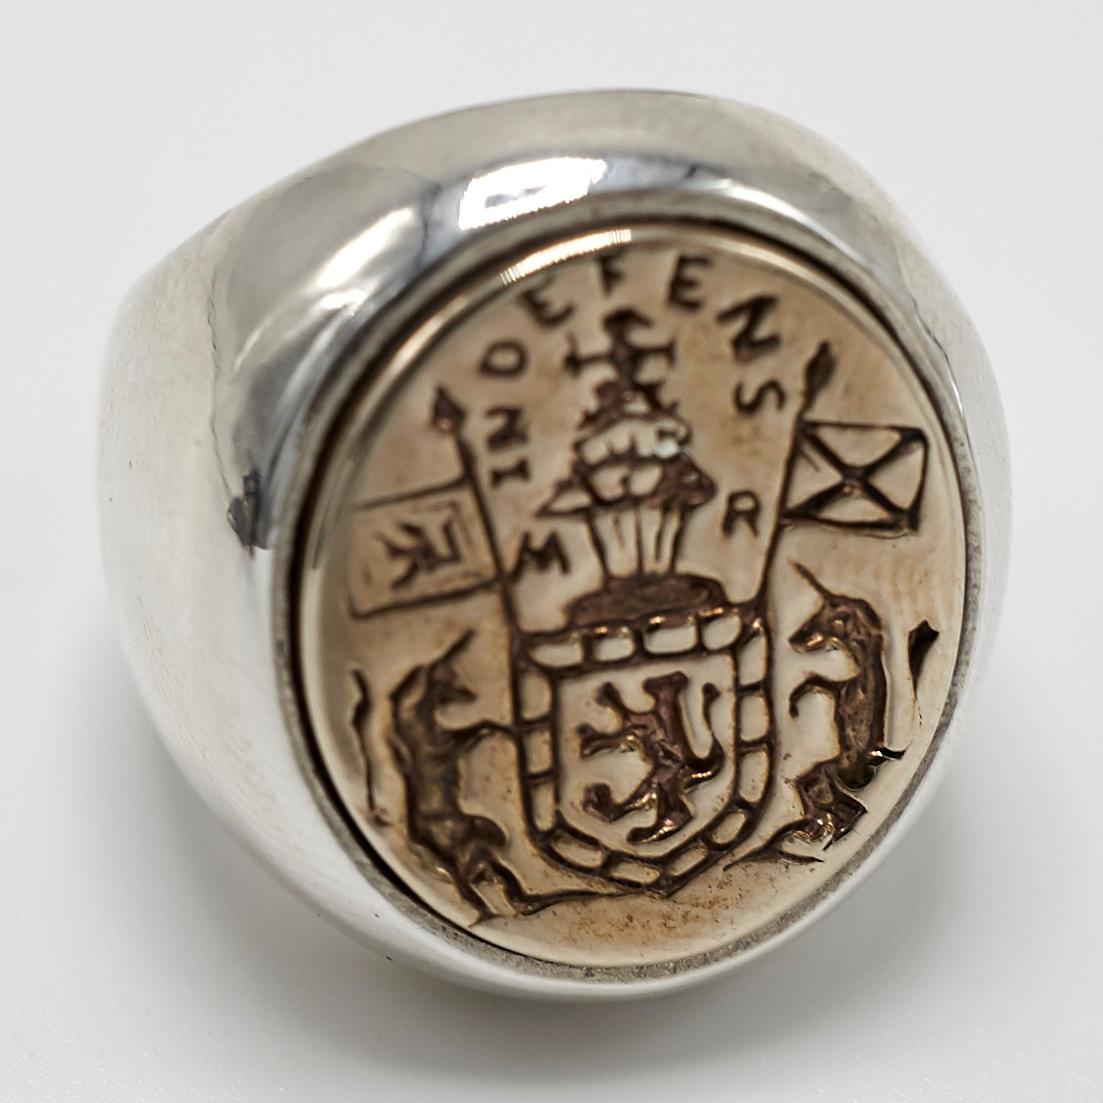 Contemporary Crest Signet Ring Sterling Silver Bronze Unisex J Dauphin